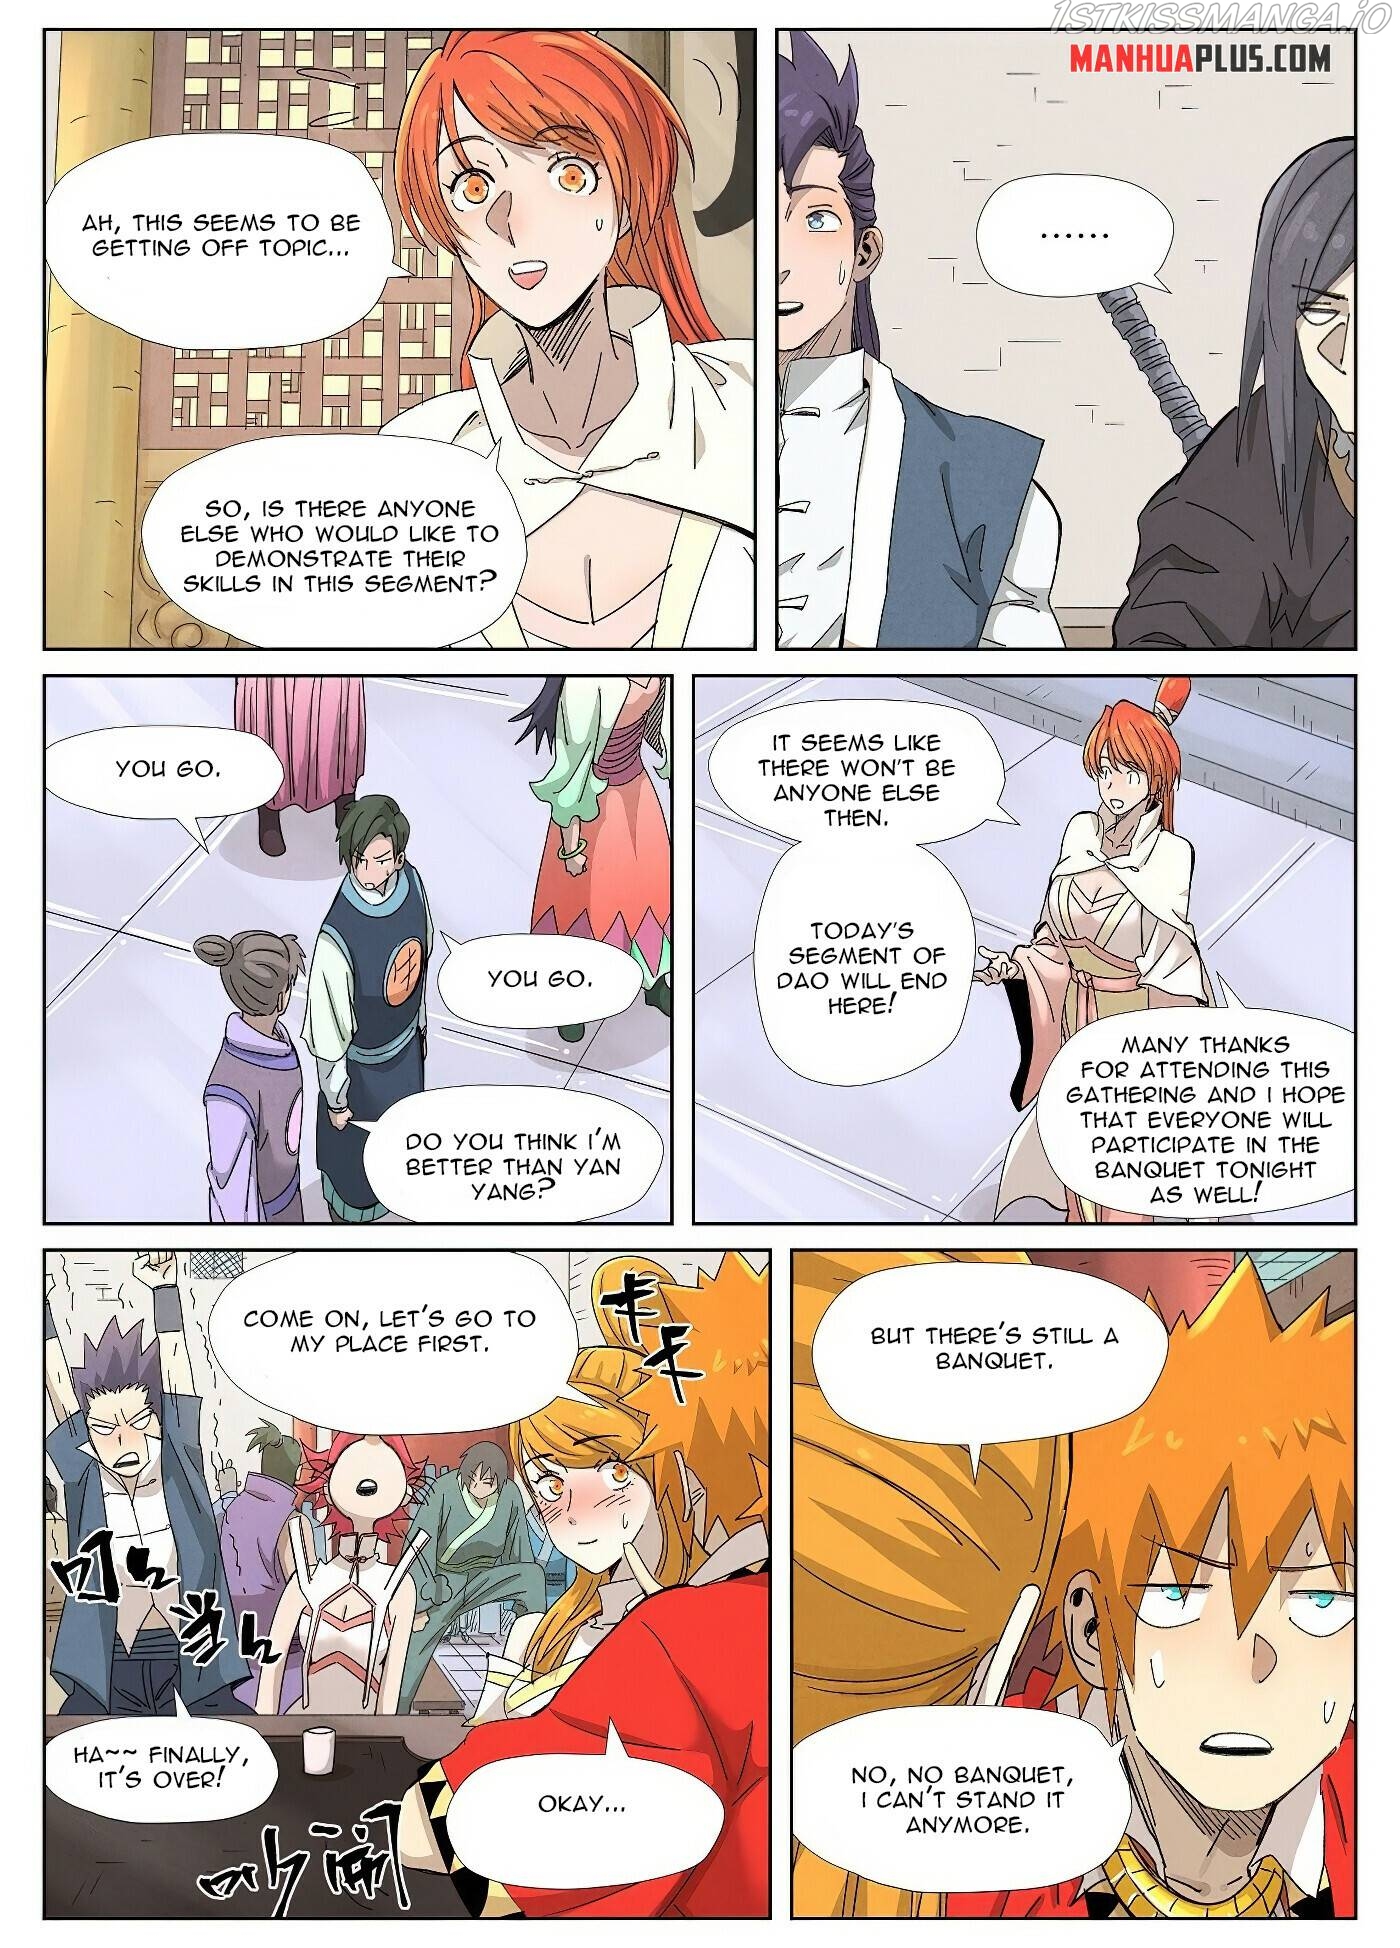 Tales of Demons and Gods Manhua Chapter 342.6 - Page 9